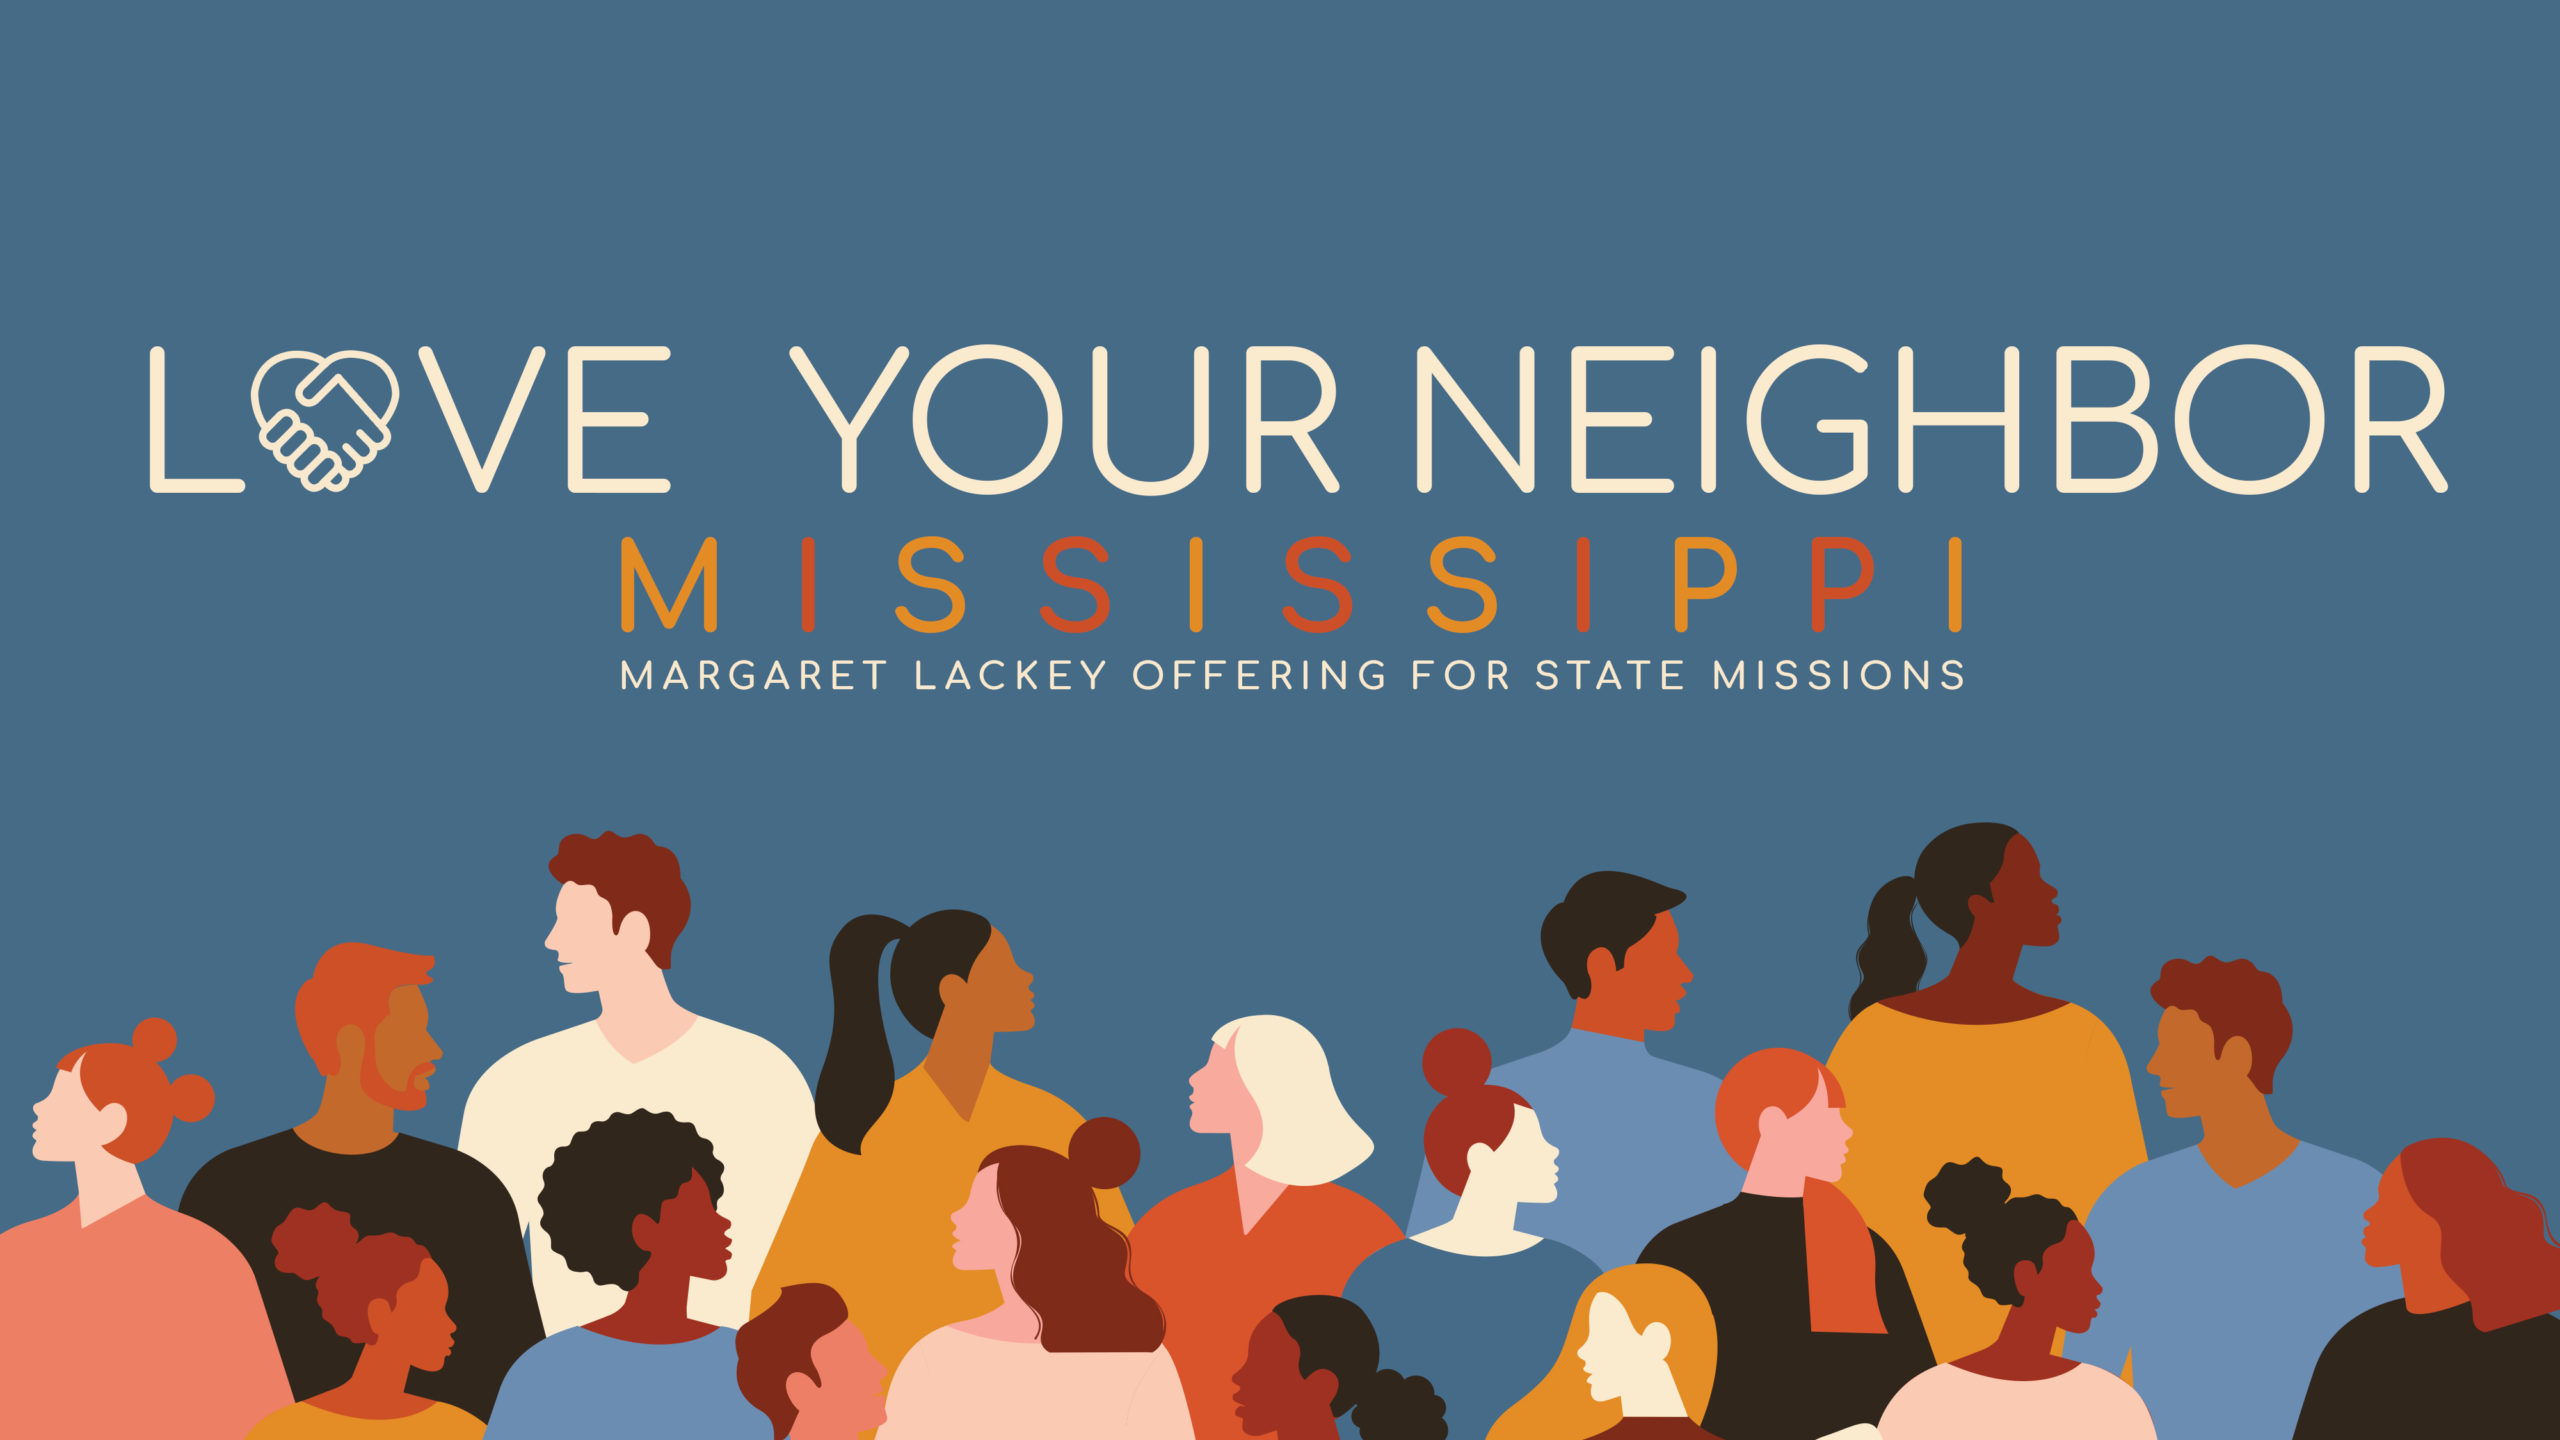 Margaret Lackey Offering for State Missions